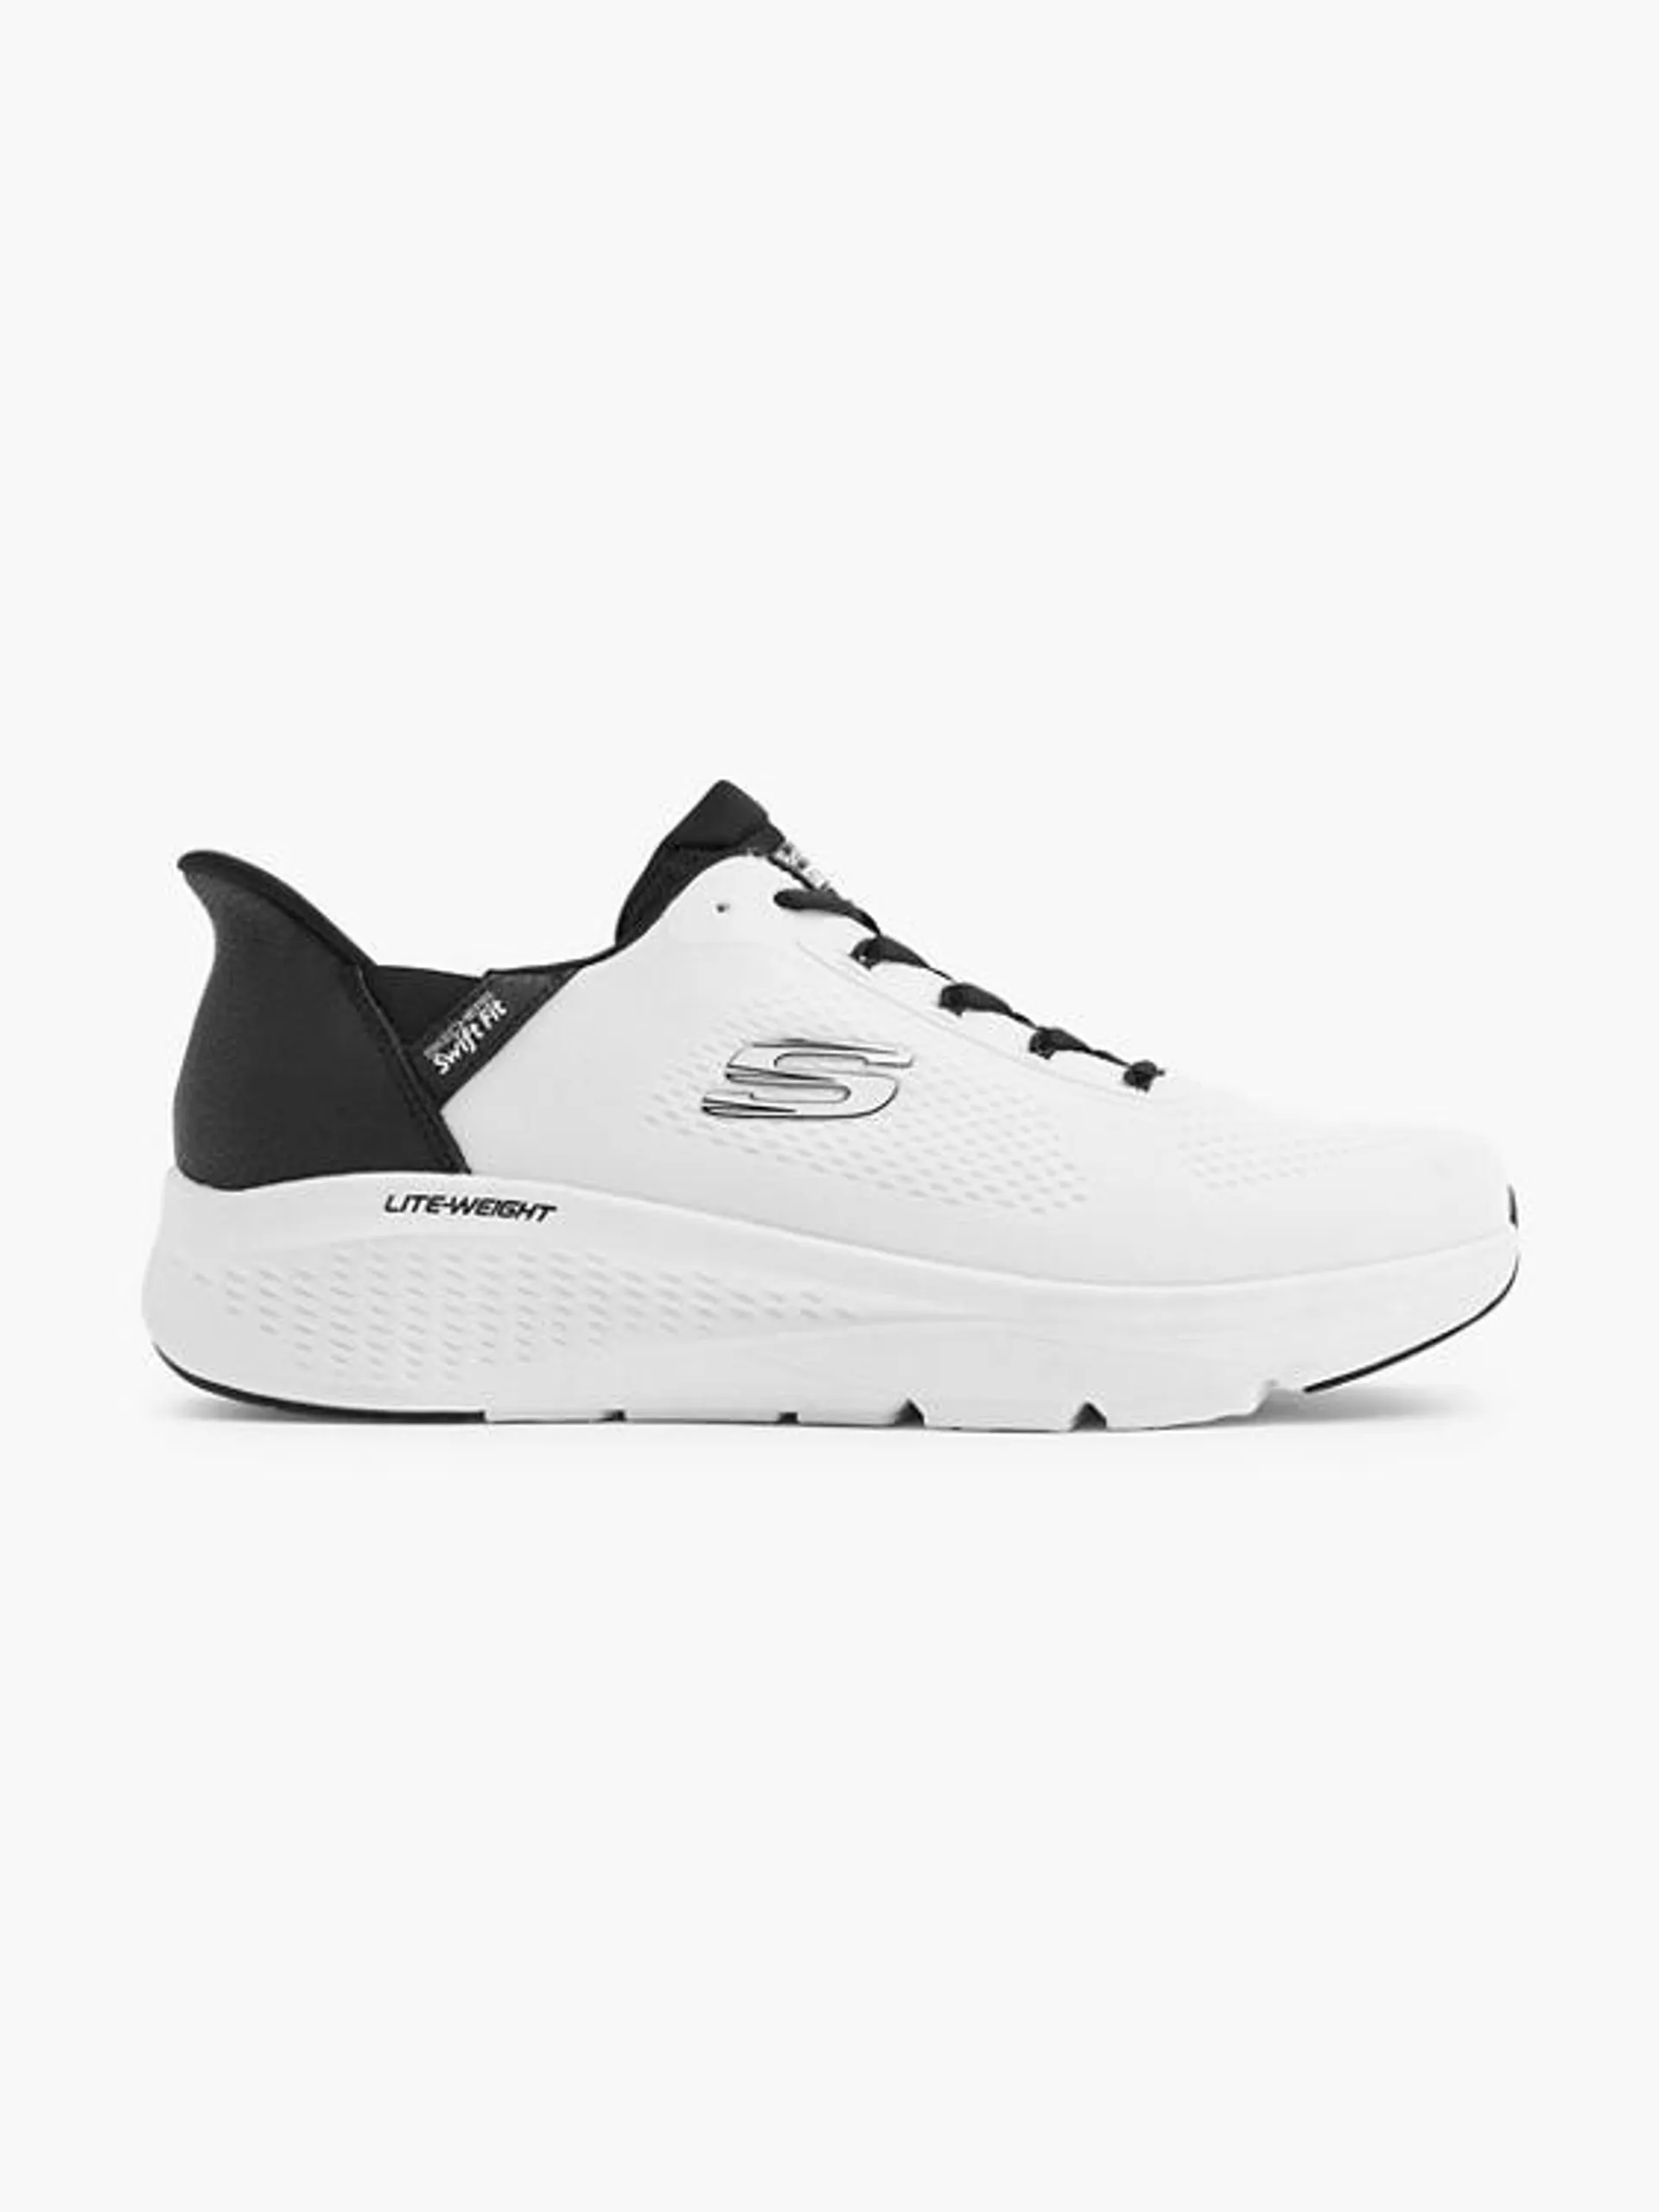 Swift Fit Hands Free Skechers White/Black Lace Up Trainers